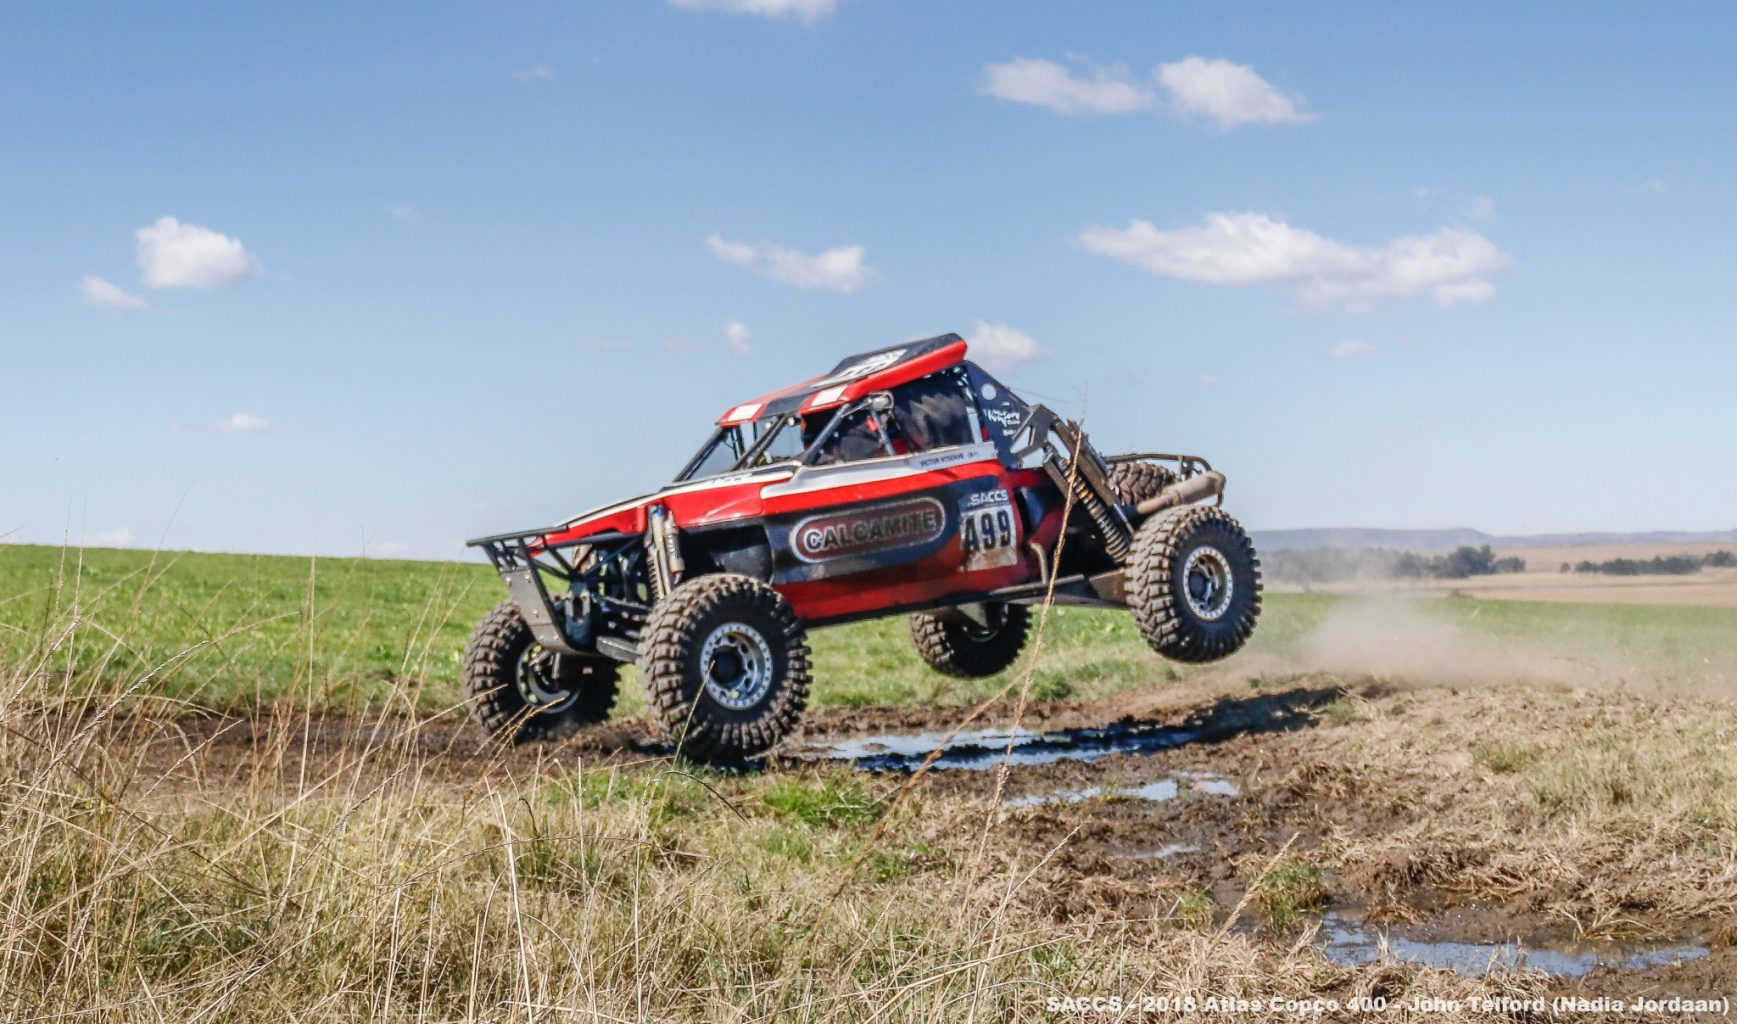 SPECIAL VEHICLE CHAMPIONSHIPS BALANCED ON A KNIFE-EDGE